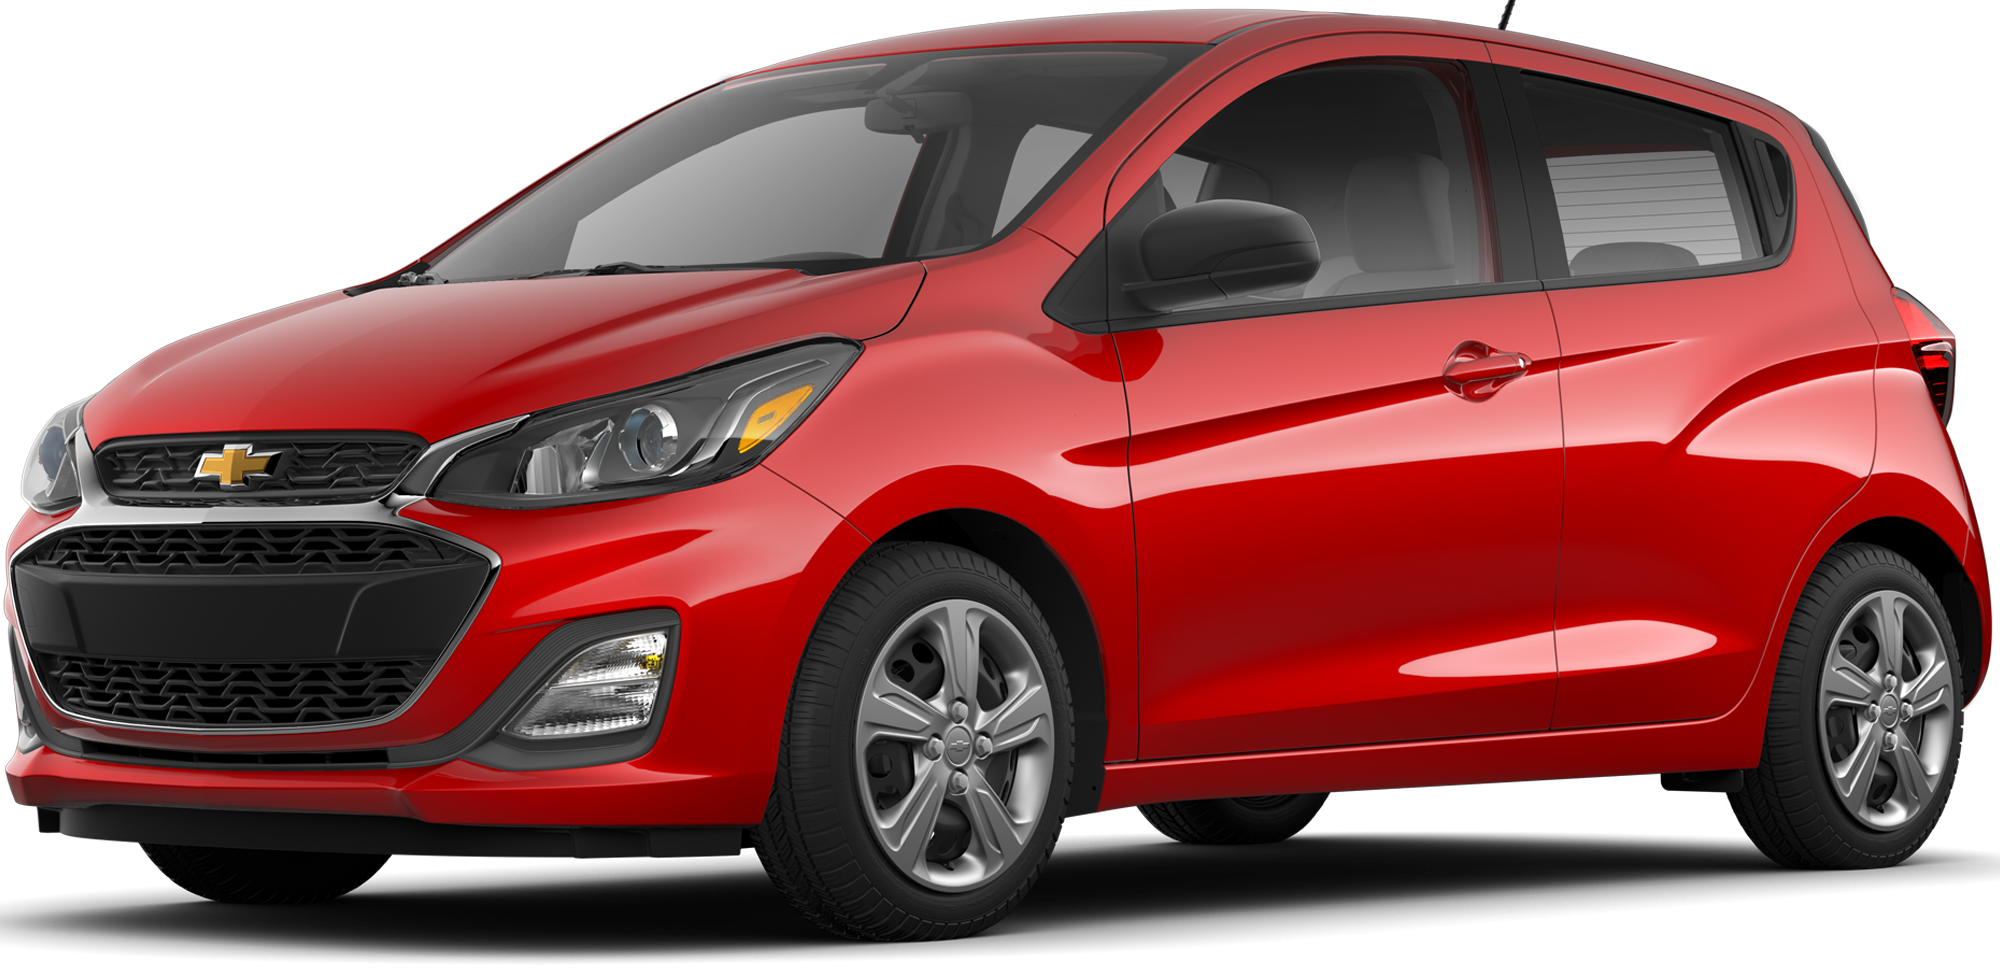 2020-chevrolet-spark-incentives-specials-offers-in-edmonton-ab